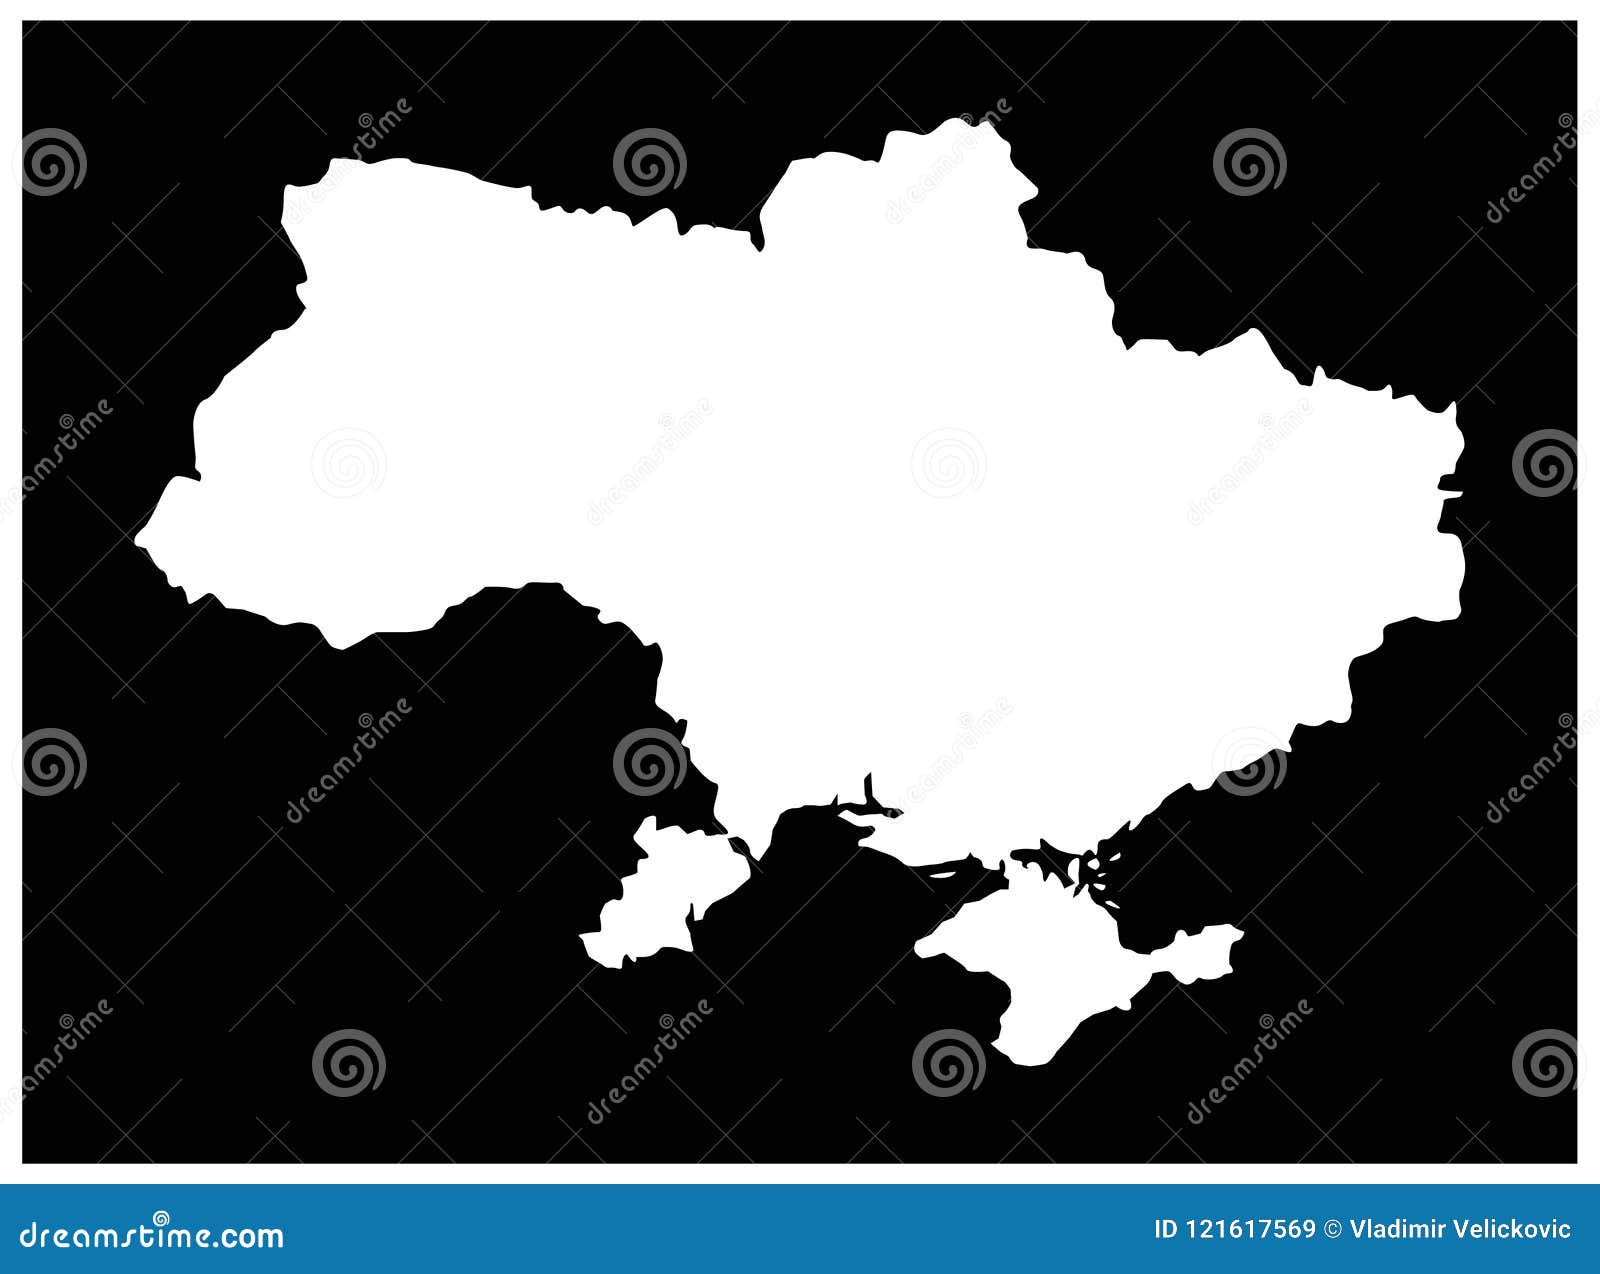 ukraine map - sovereign state in eastern europe